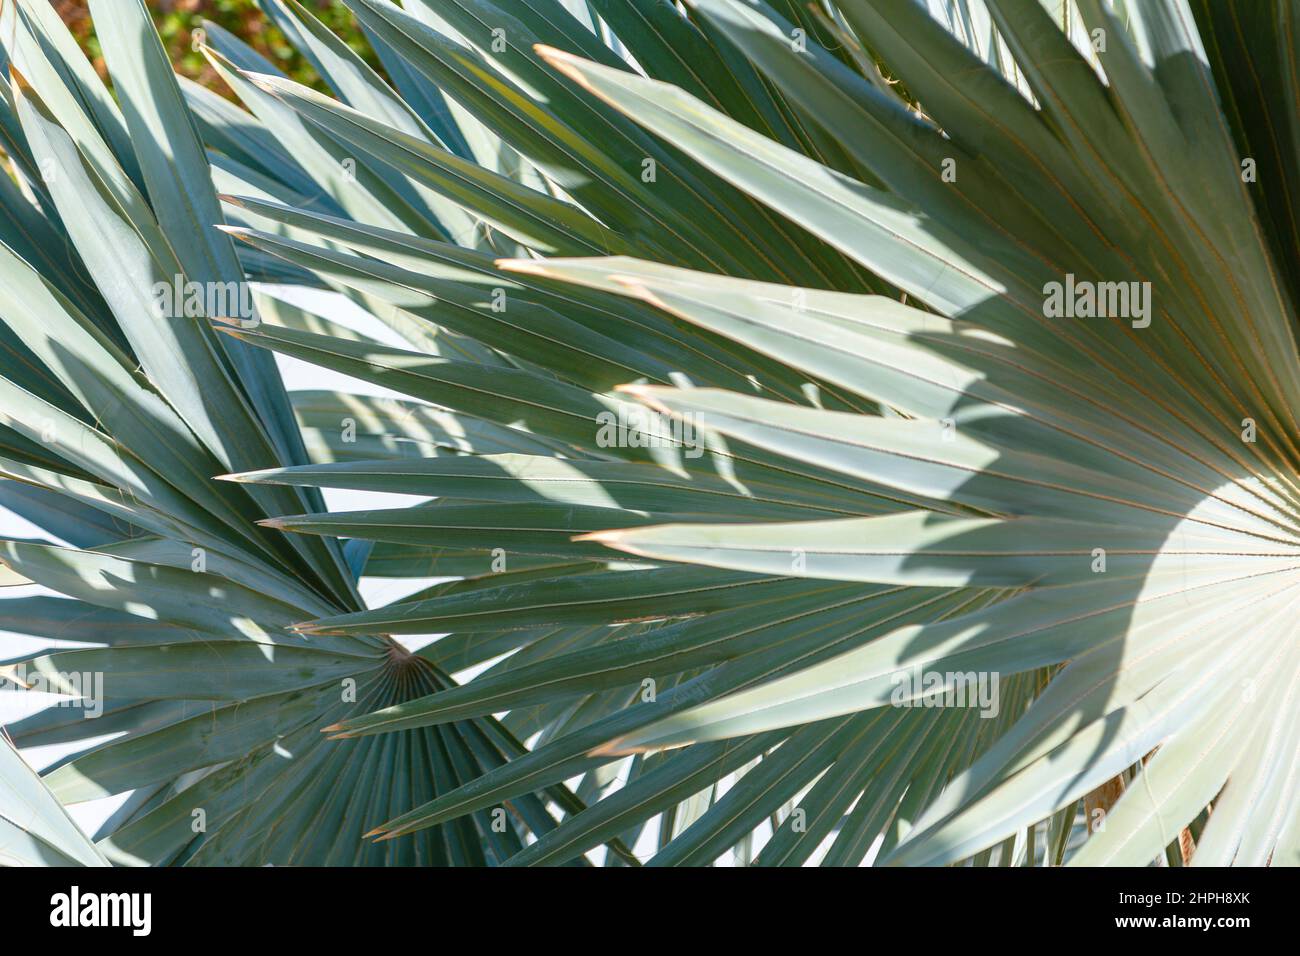 Tropical palm tree green leaves With beautiful shadows as background. Natural eco background of exotic palm leaves plant foliage texture. Creative Stock Photo